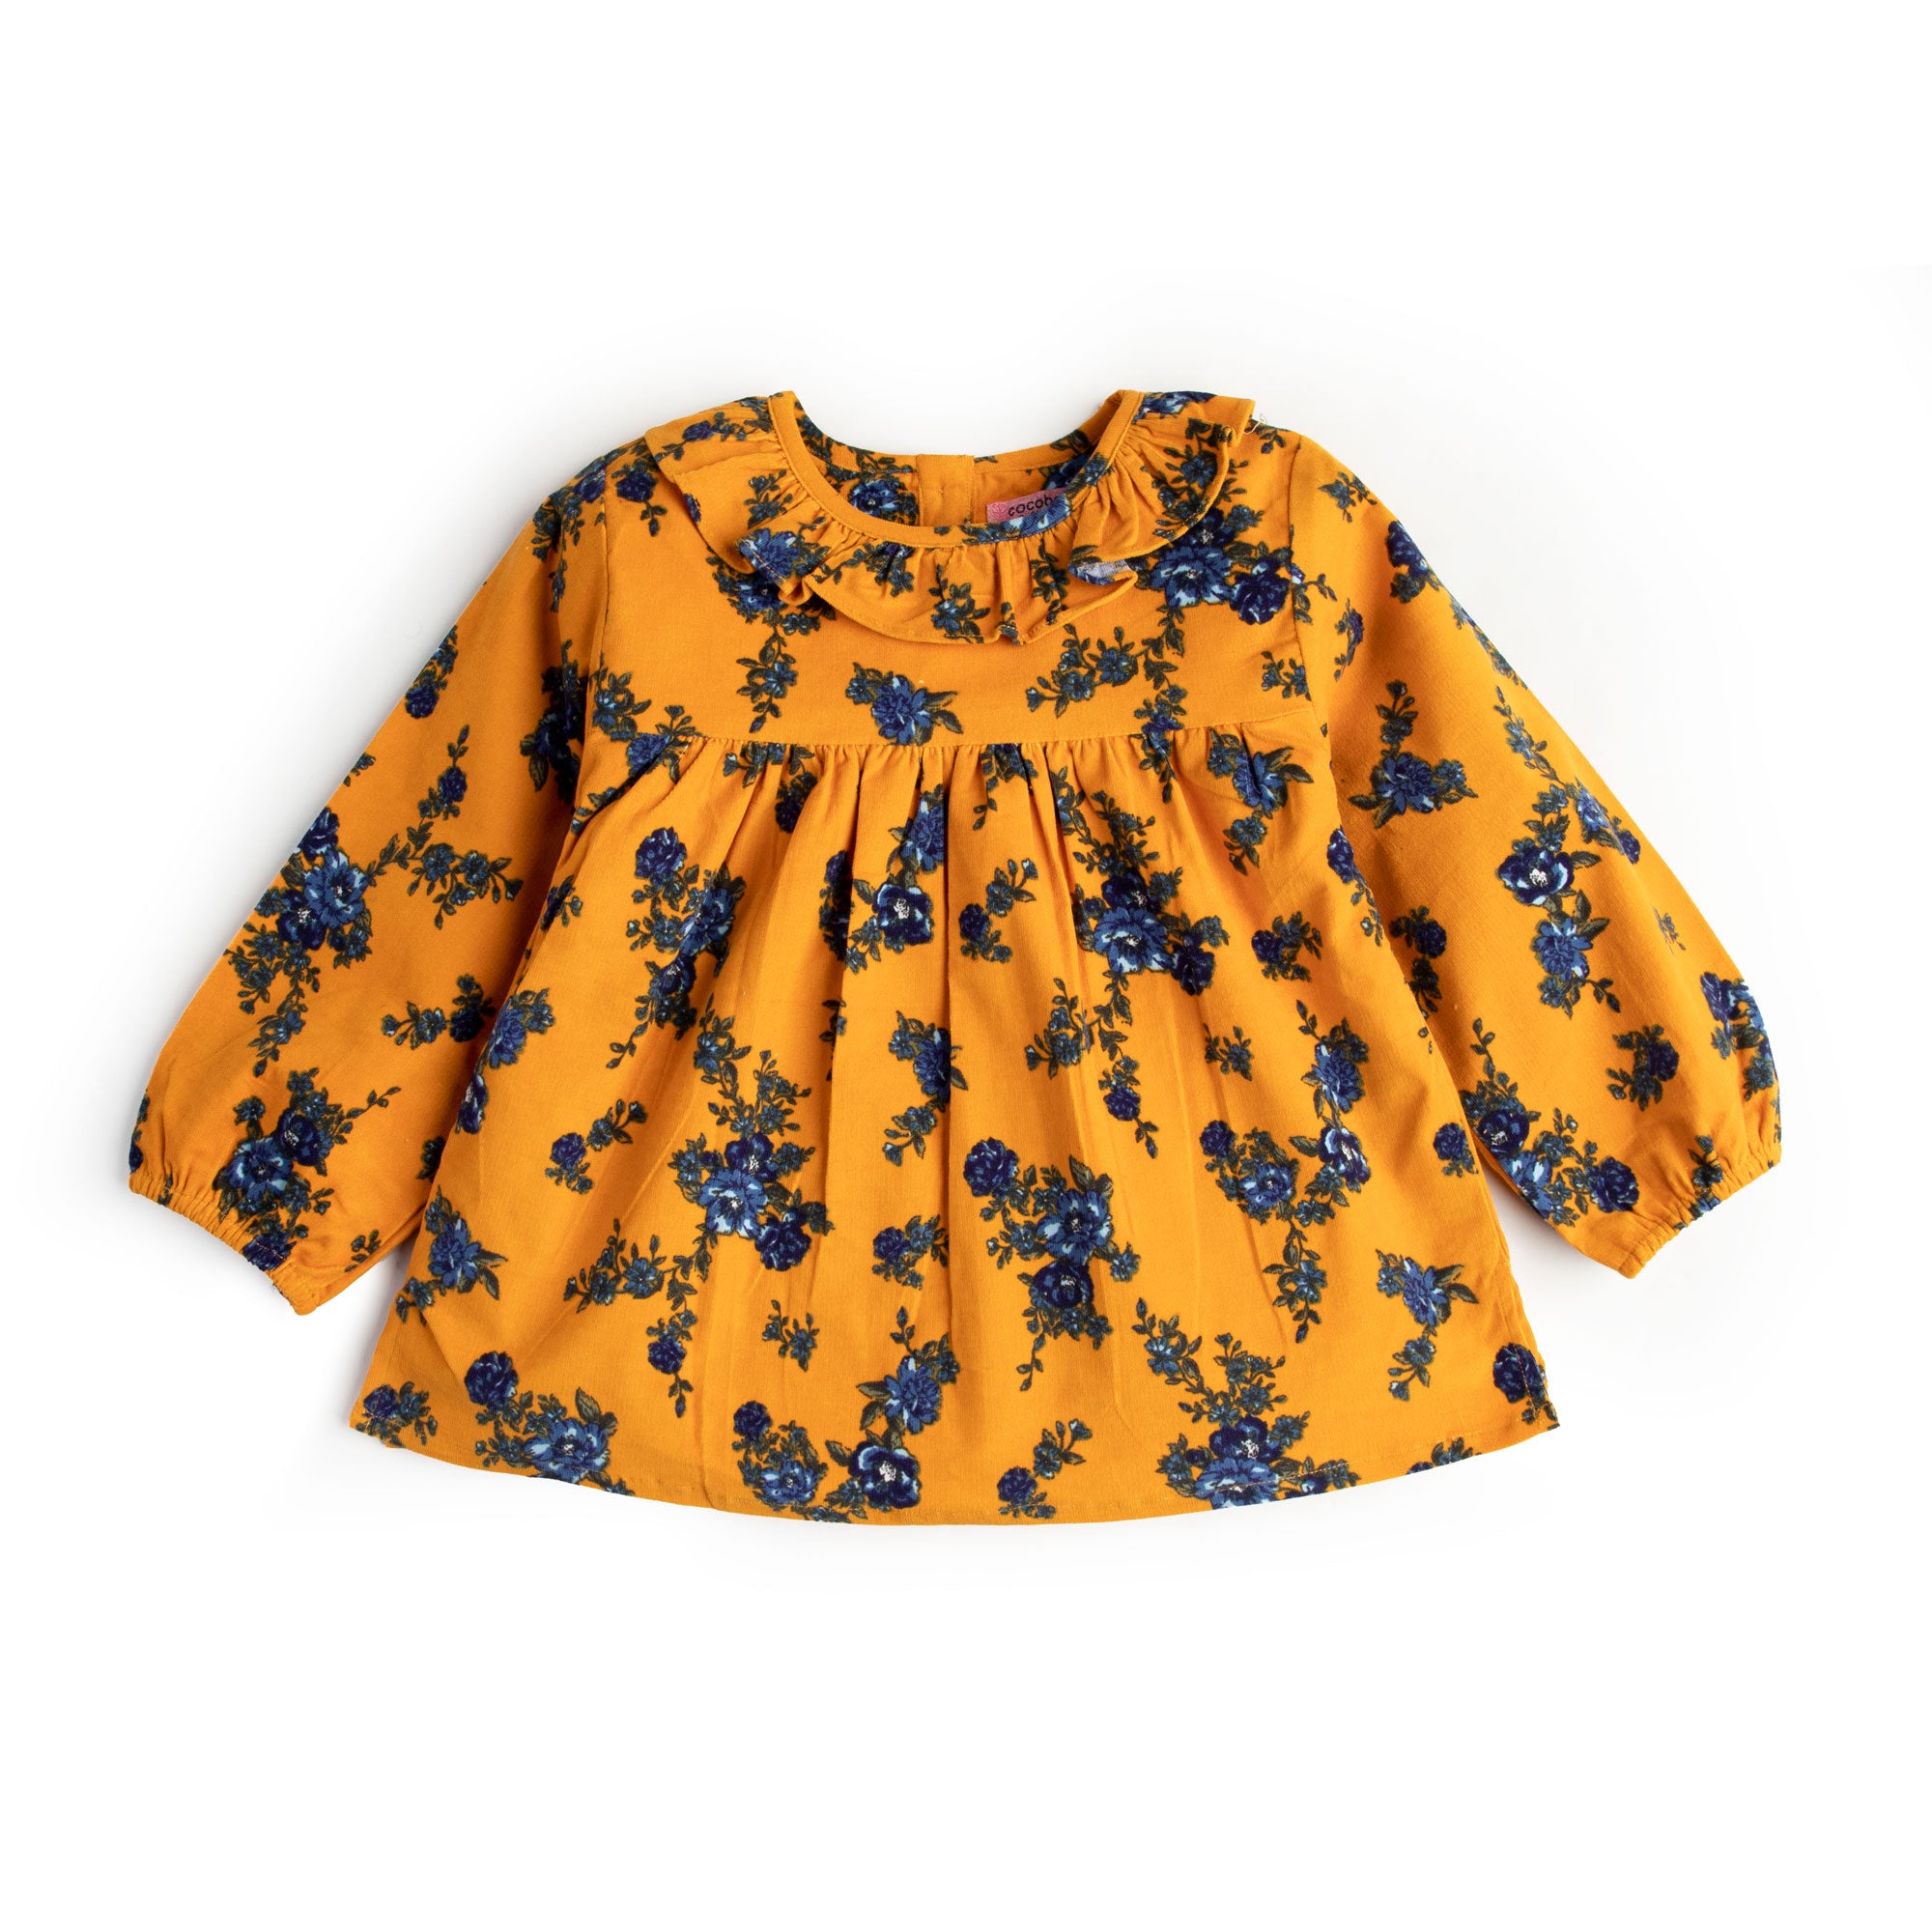 Printed Top with Frill collar